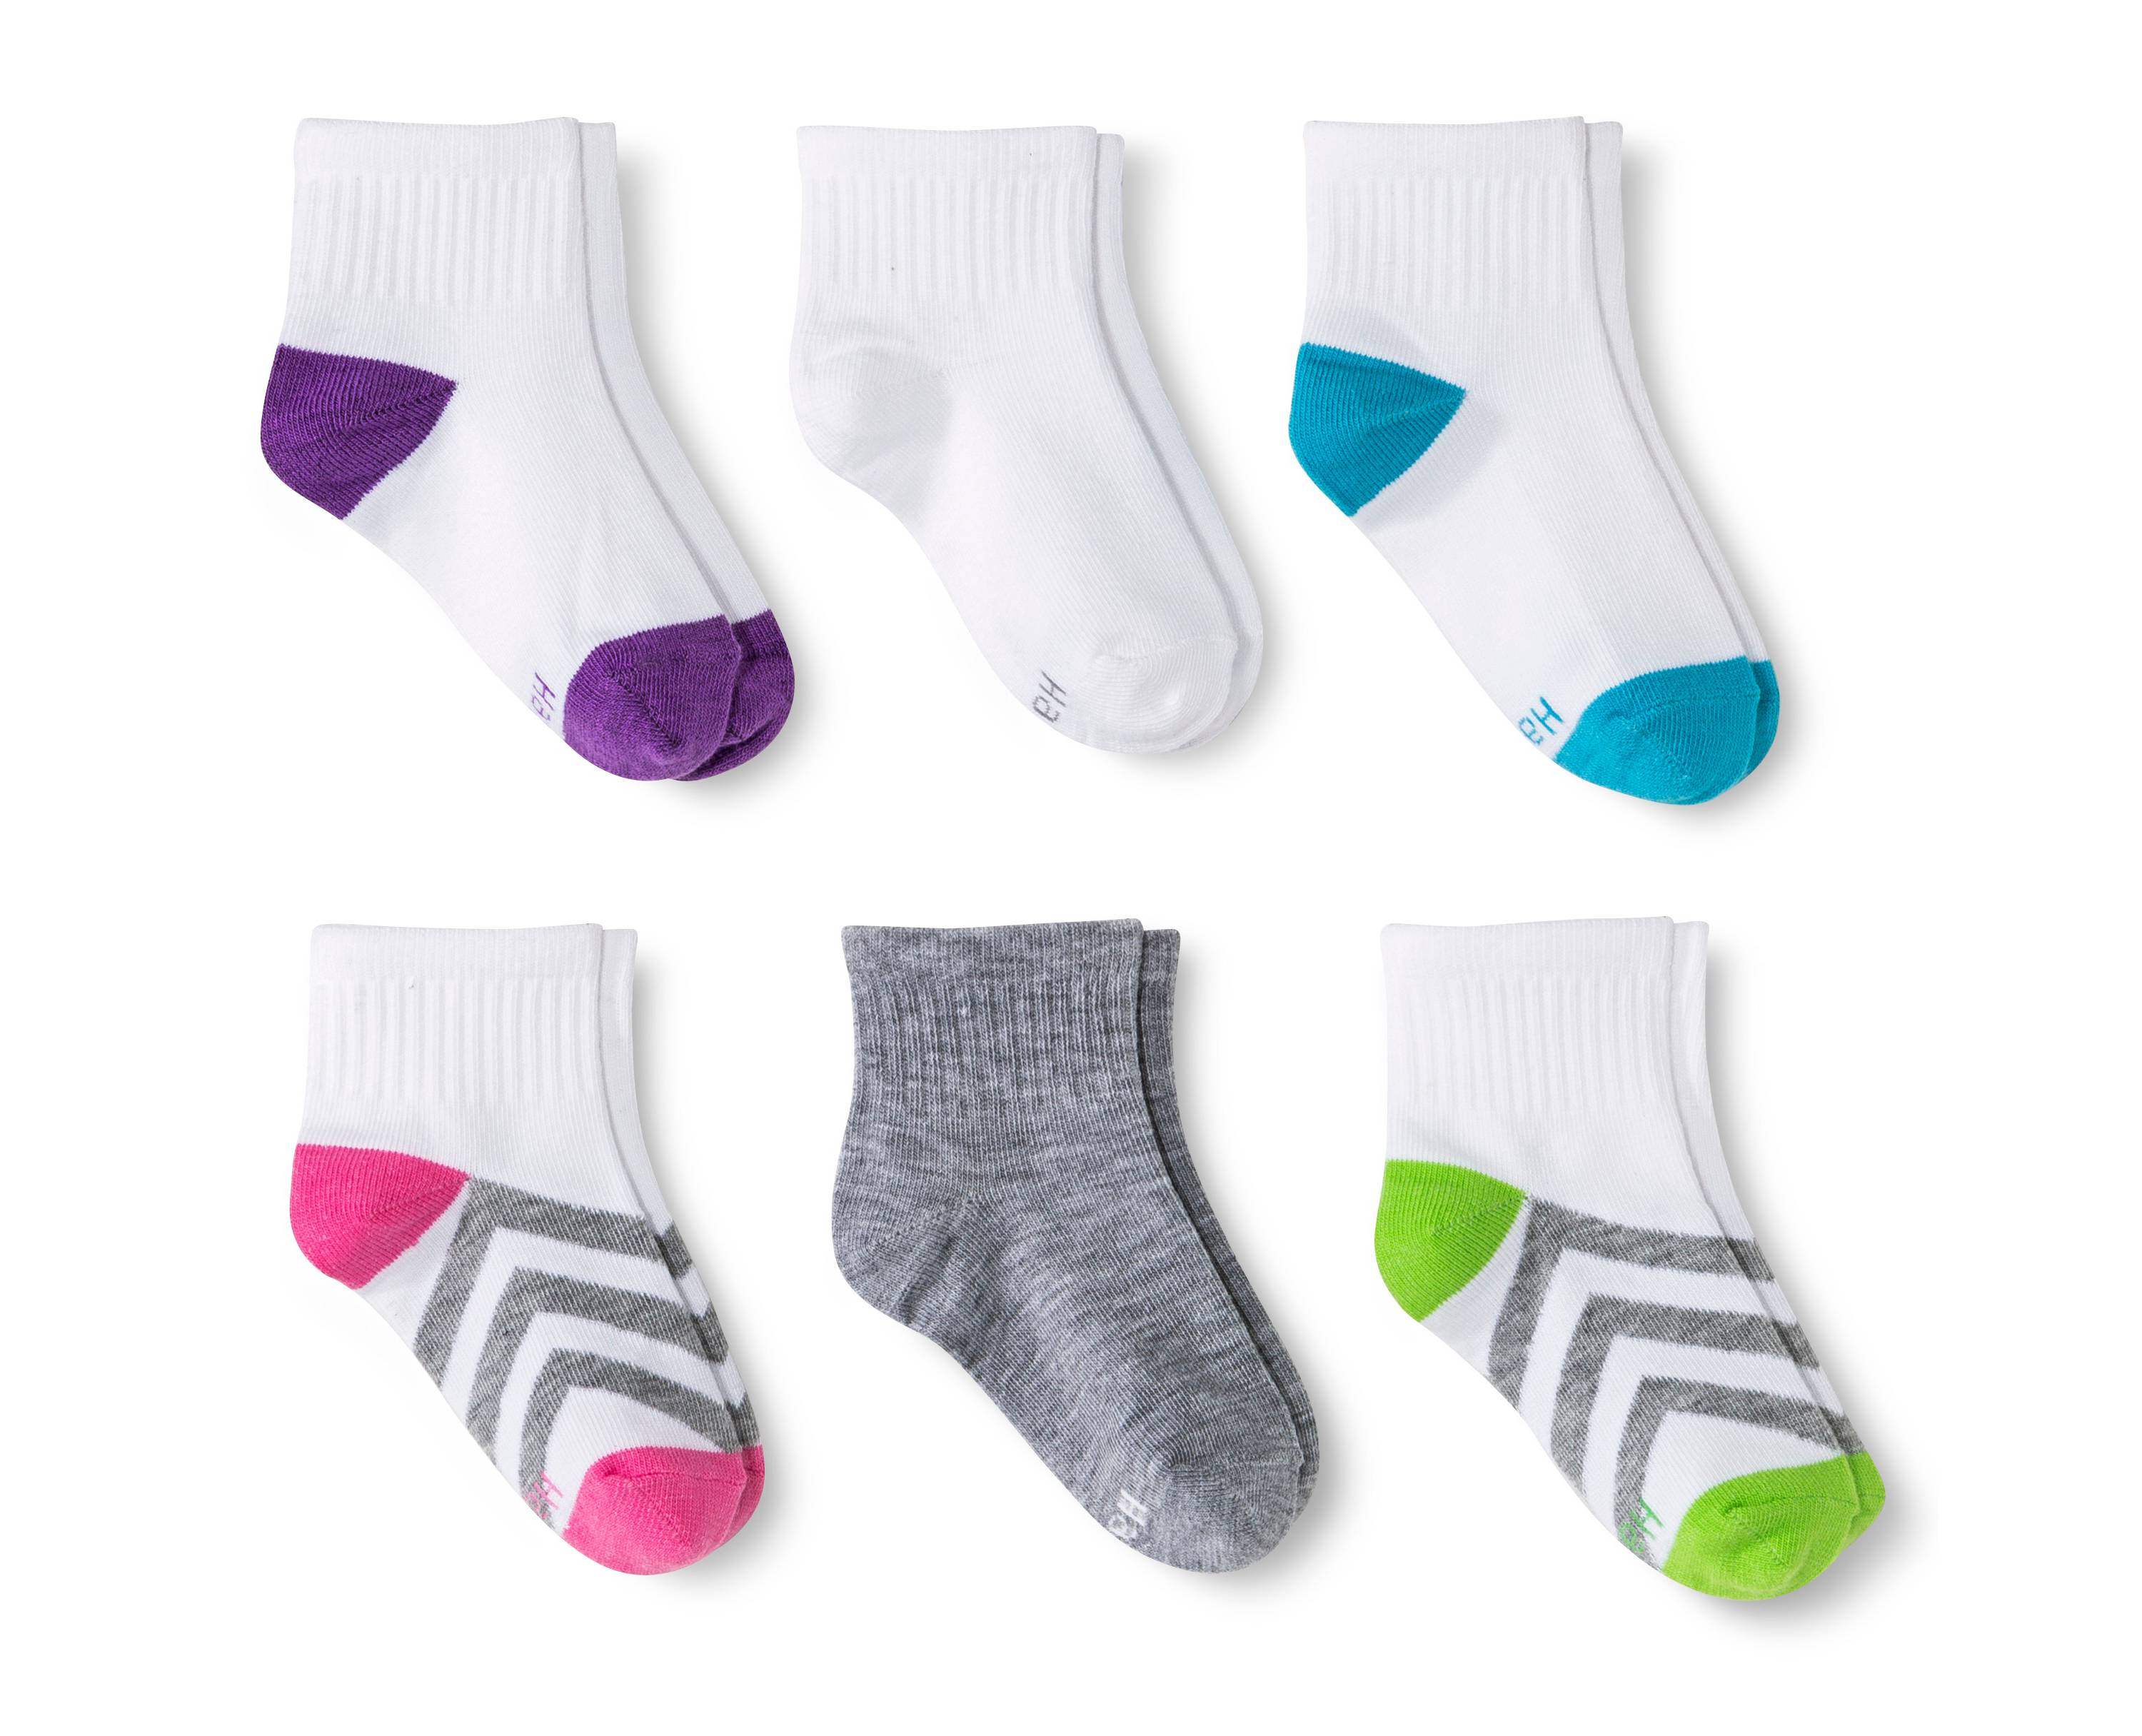 Hanes Girls Premium 6 Pack Athletic Ankle Socks, L, Assorted - image 1 of 2